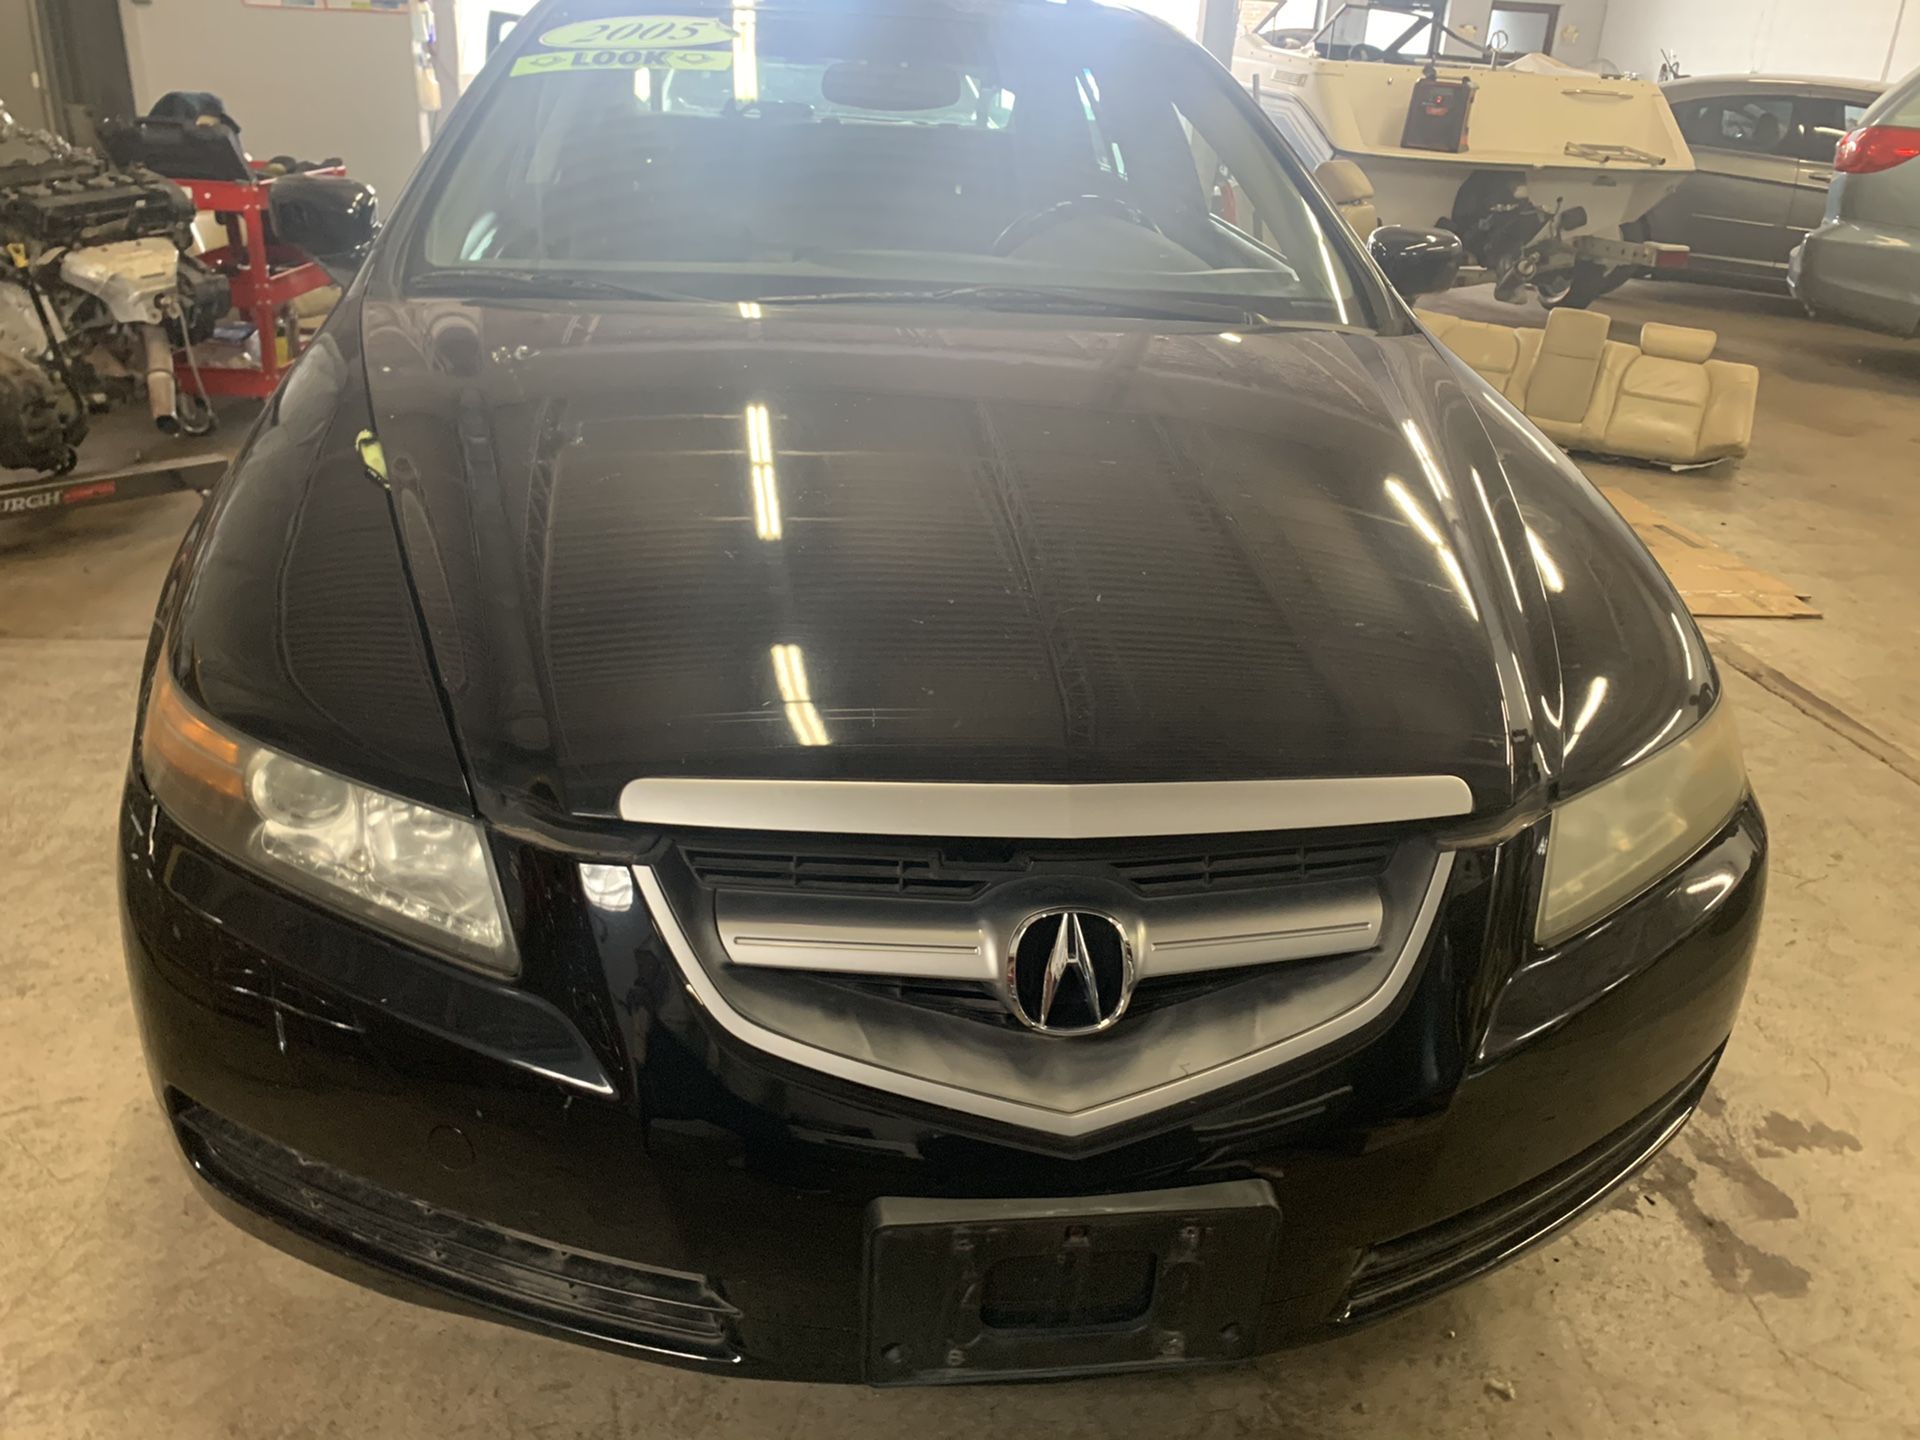 2004 Acura TL for parts only partes solamente